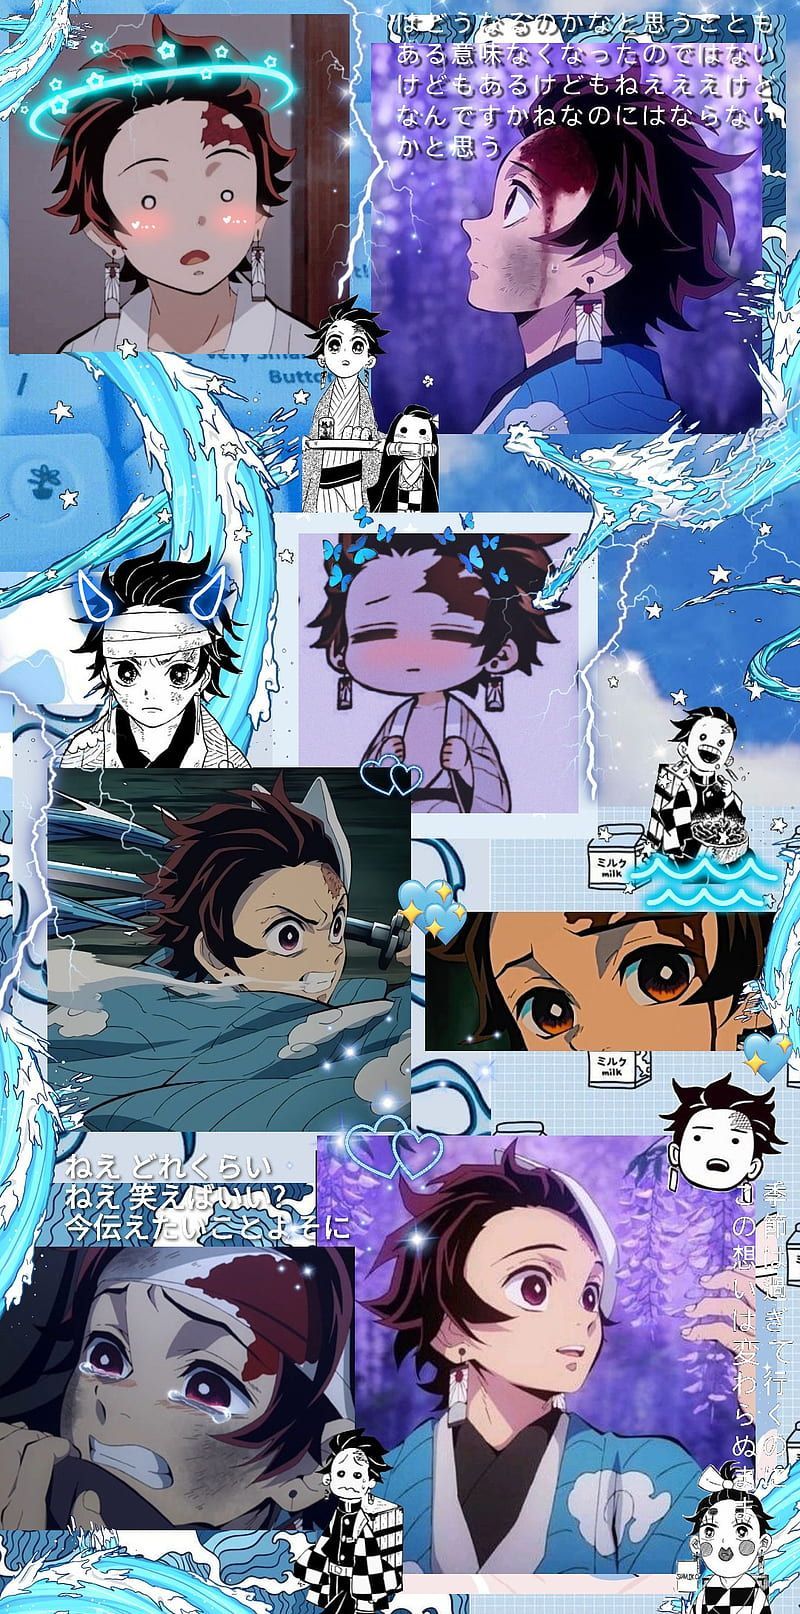 A collage of pictures with different characters - Demon Slayer, Tanjiro Kamado